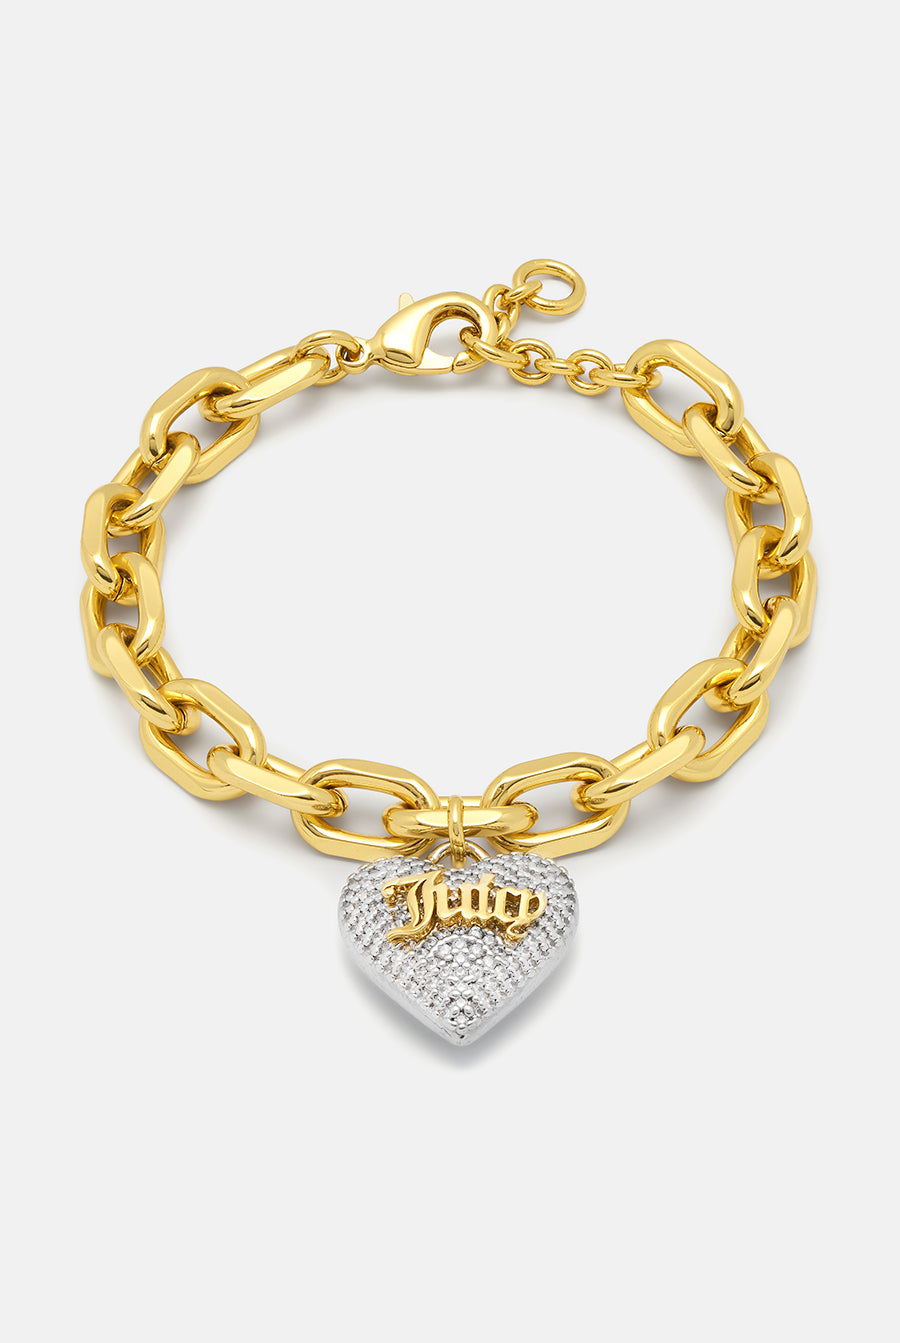  Juicy Couture Goldtone and Light Rose Heart Charm